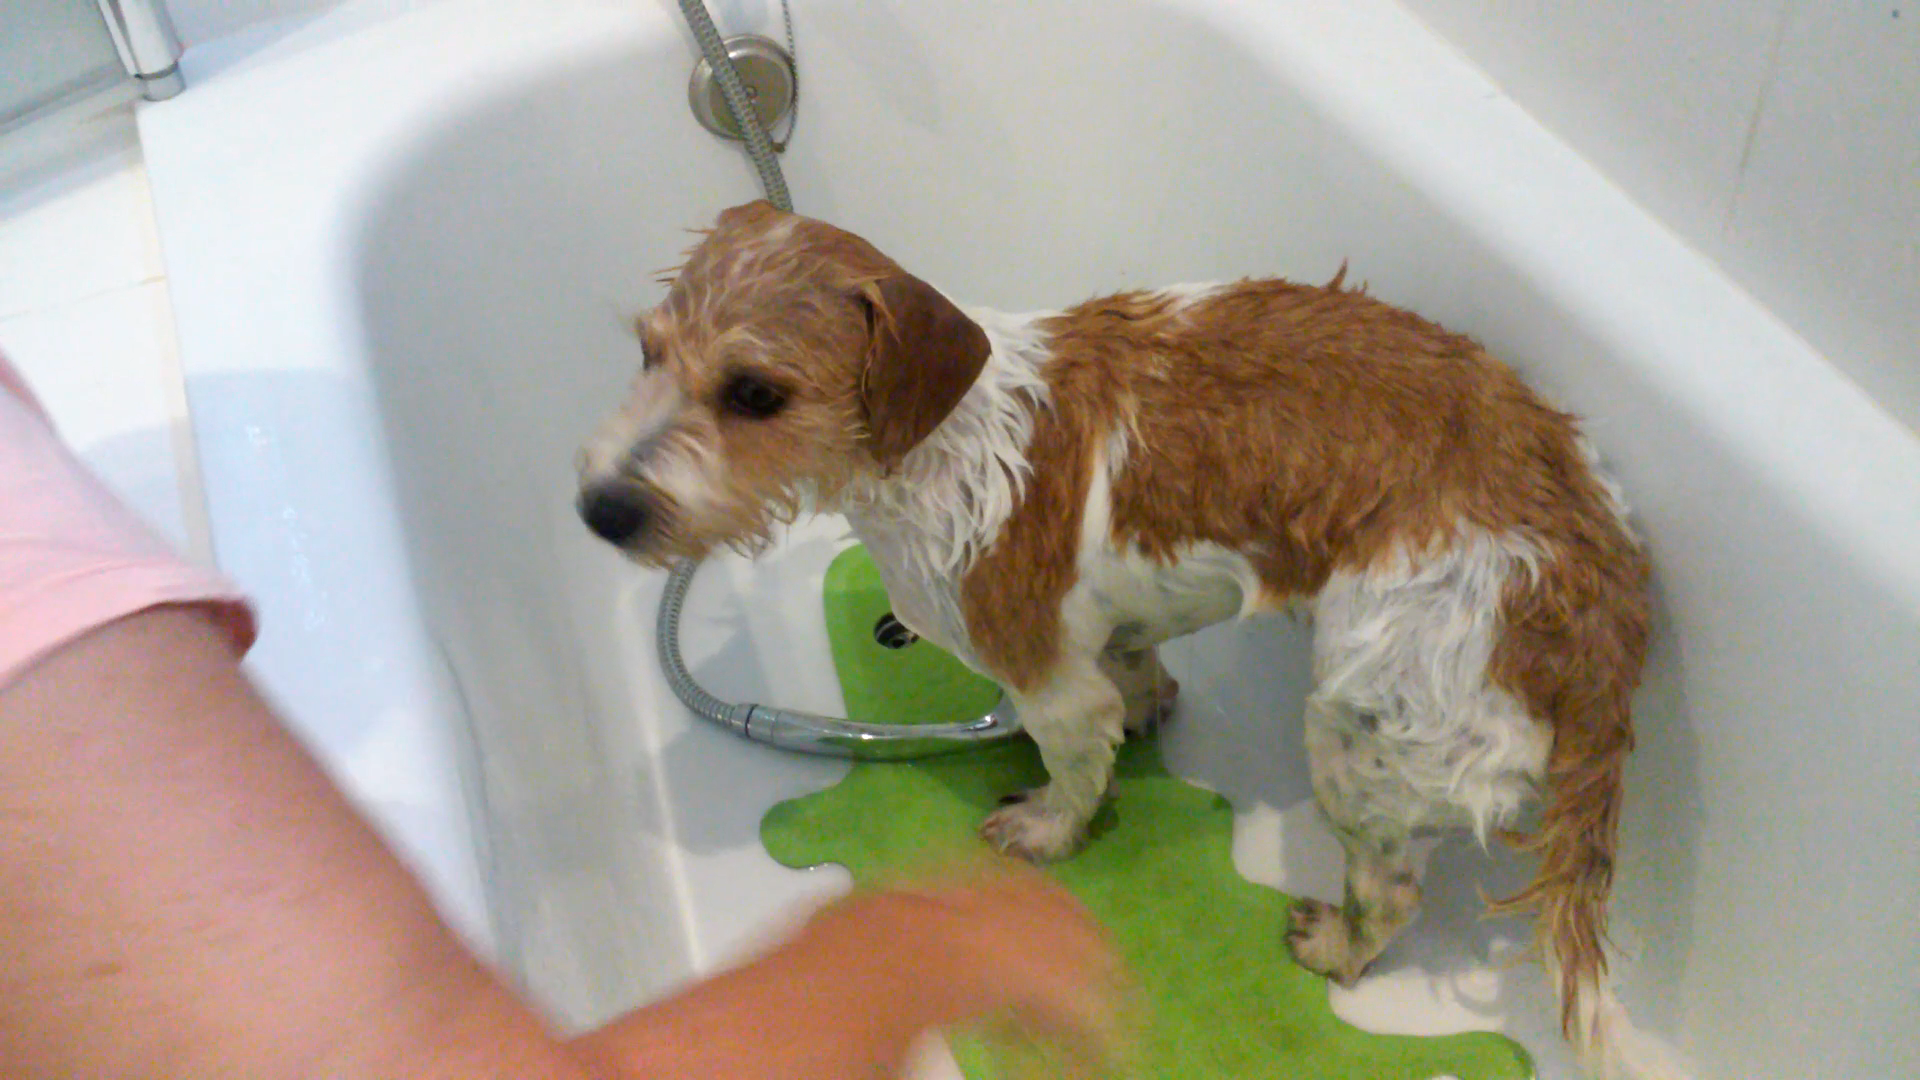 Showering The Dog